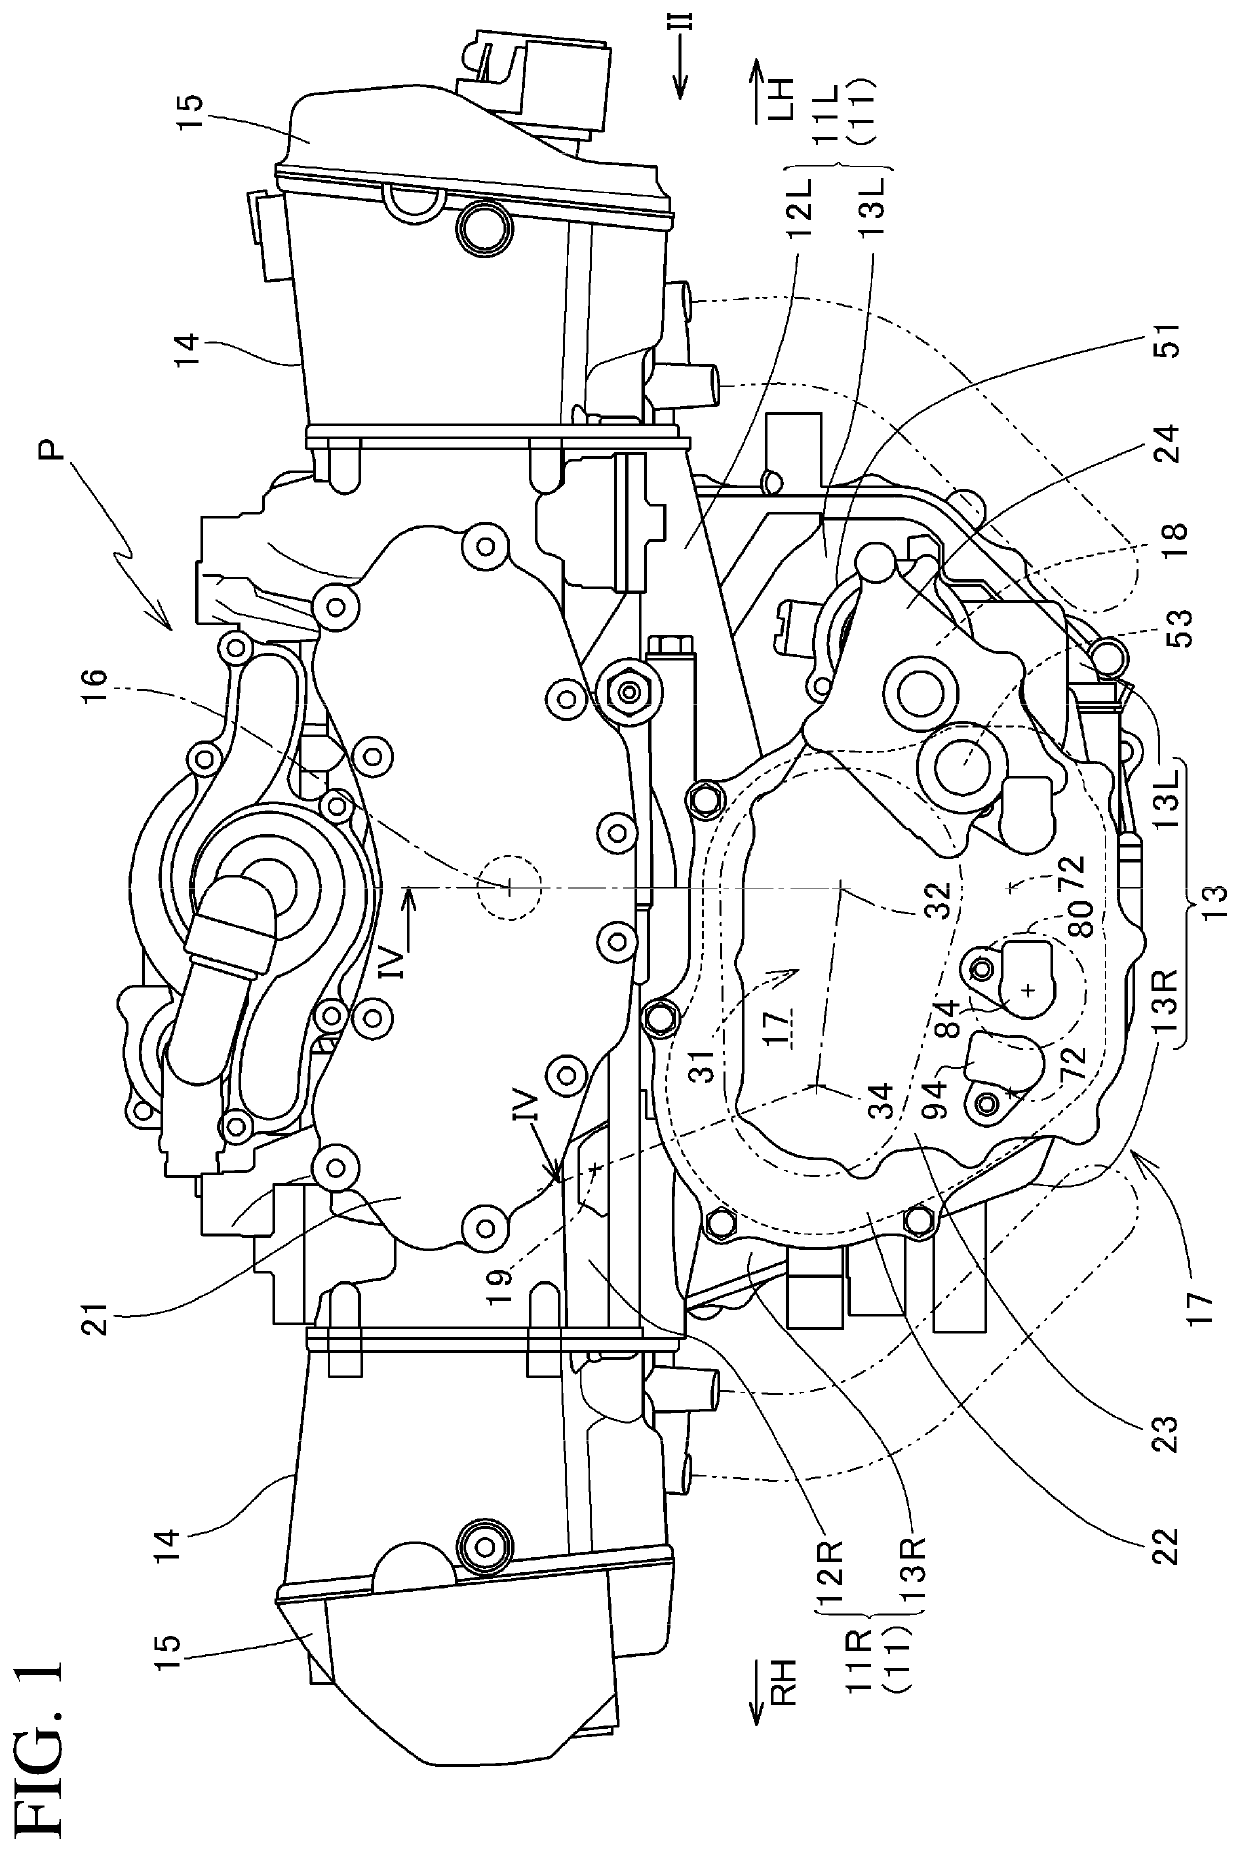 Shift drum angle detecting device for transmission